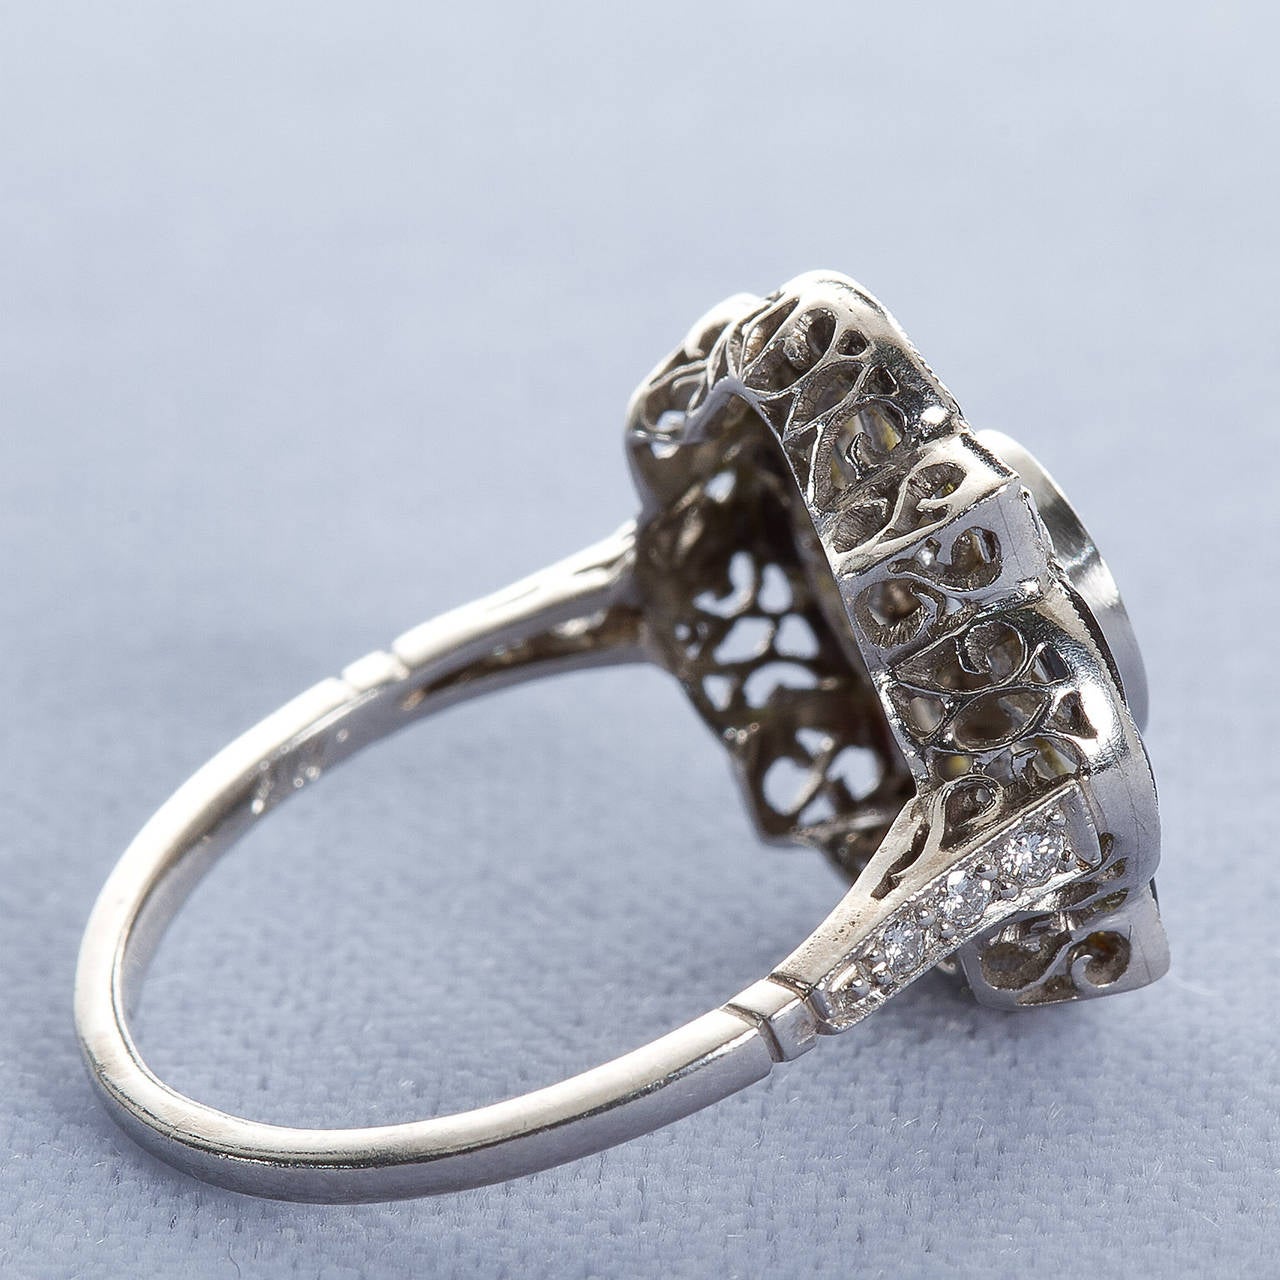 A wonderful antique platinum ring with old European center diamond of approx 1.10 carat surrounded by carved black and white onyx.

Dealer ref No. 4912